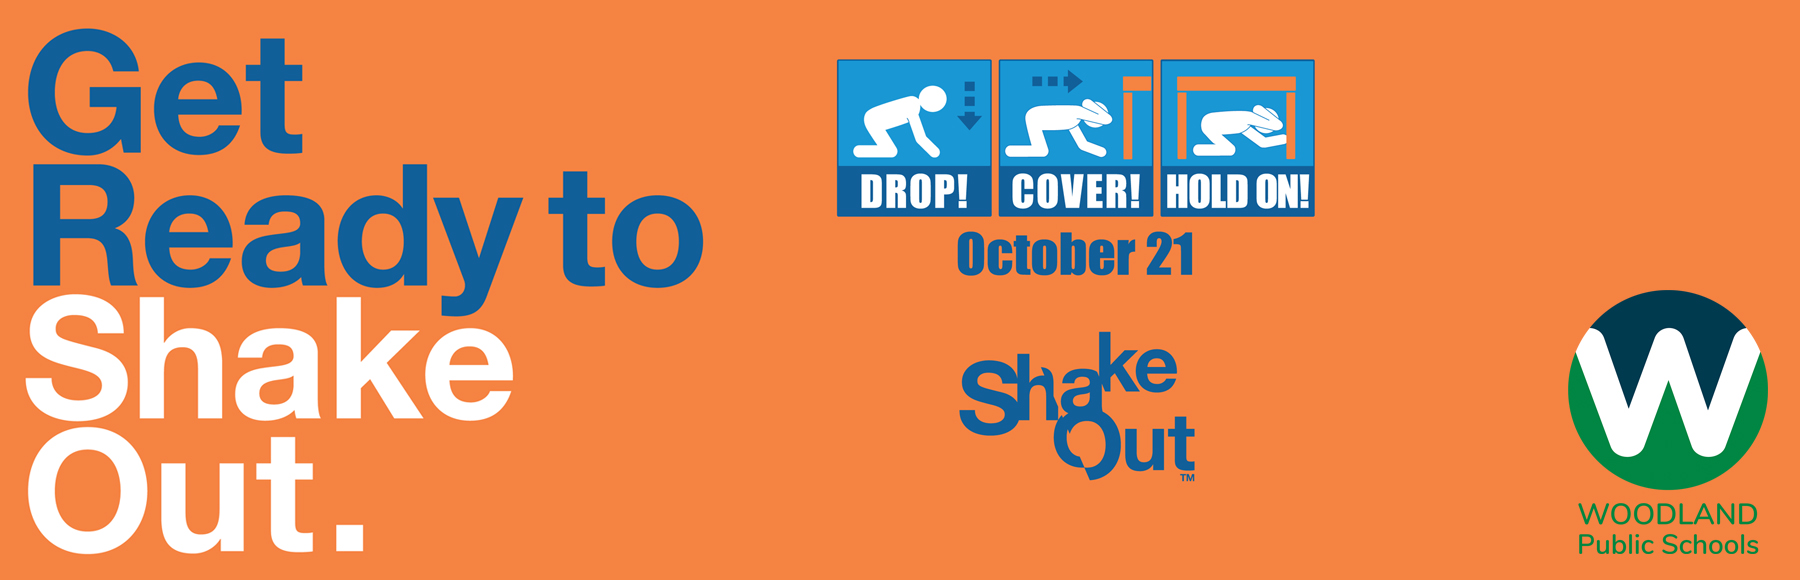 Woodland Public Schools took part in the Great Washington Shakeout Day on Thursday, October 21